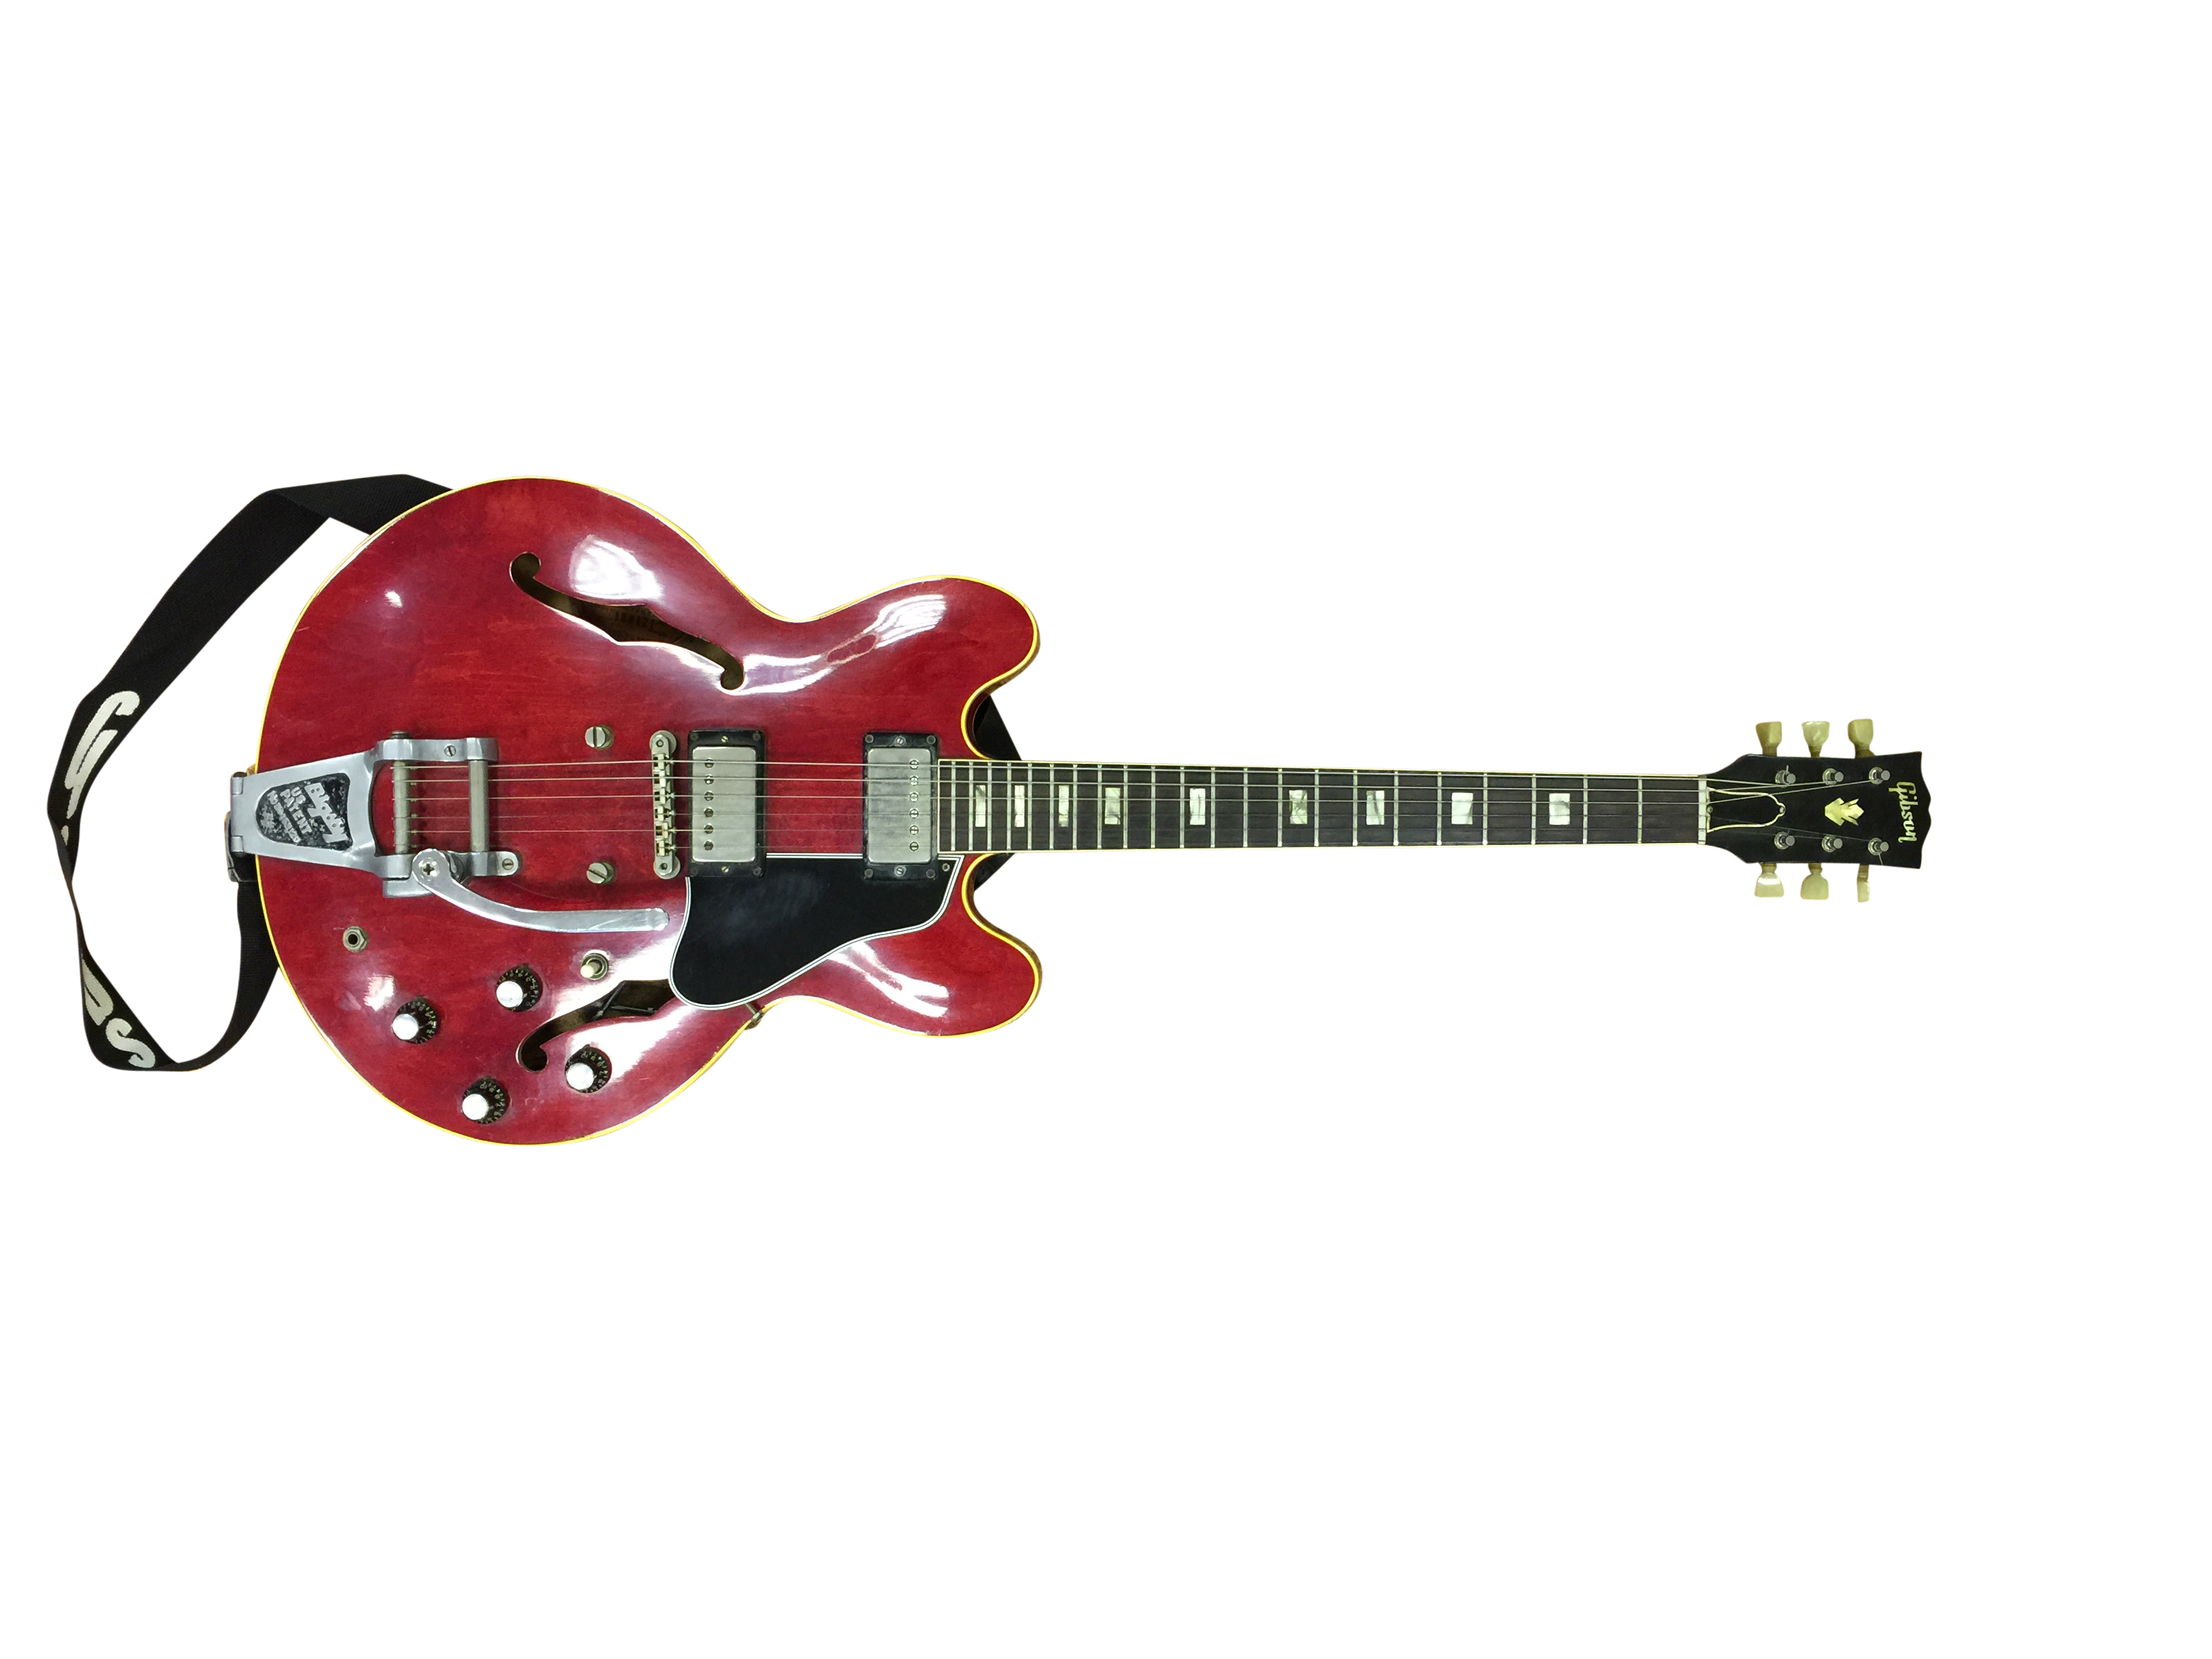 1963 GIBSON 335 CHERRY RED ELECTRIC GUITAR.